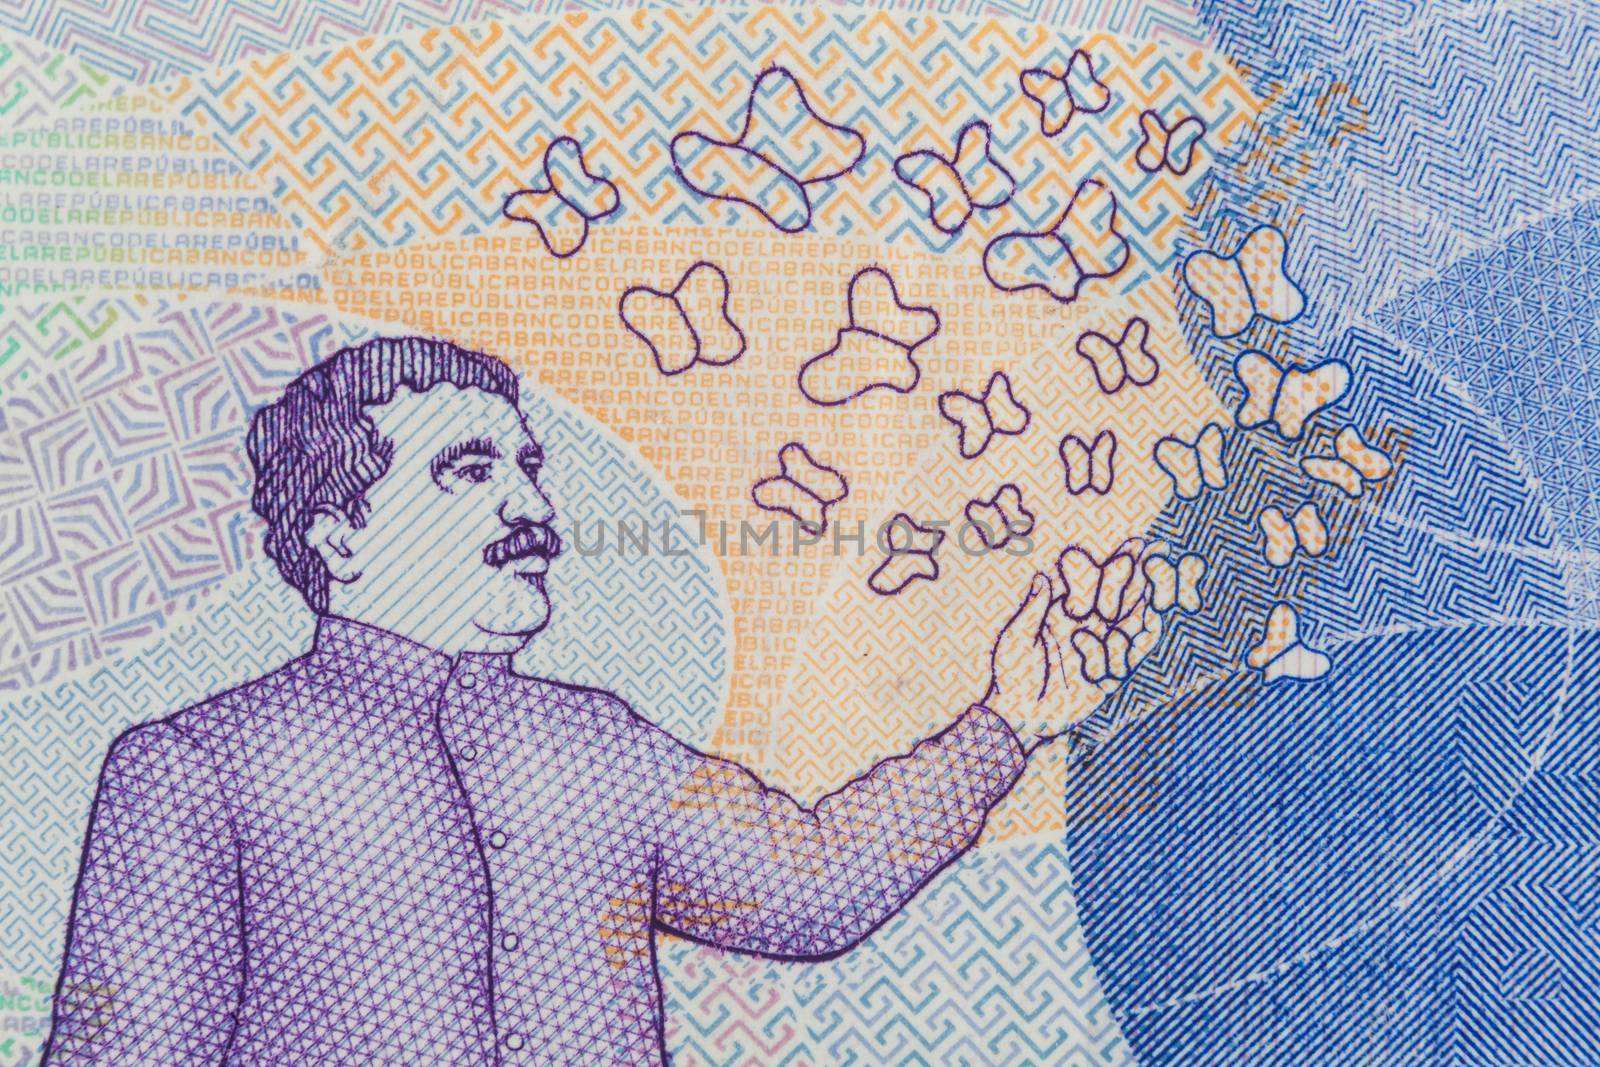 Nobel Prize Gabriel Garcia Marquez on the Fifty Thousand Colombian Pesos Bill